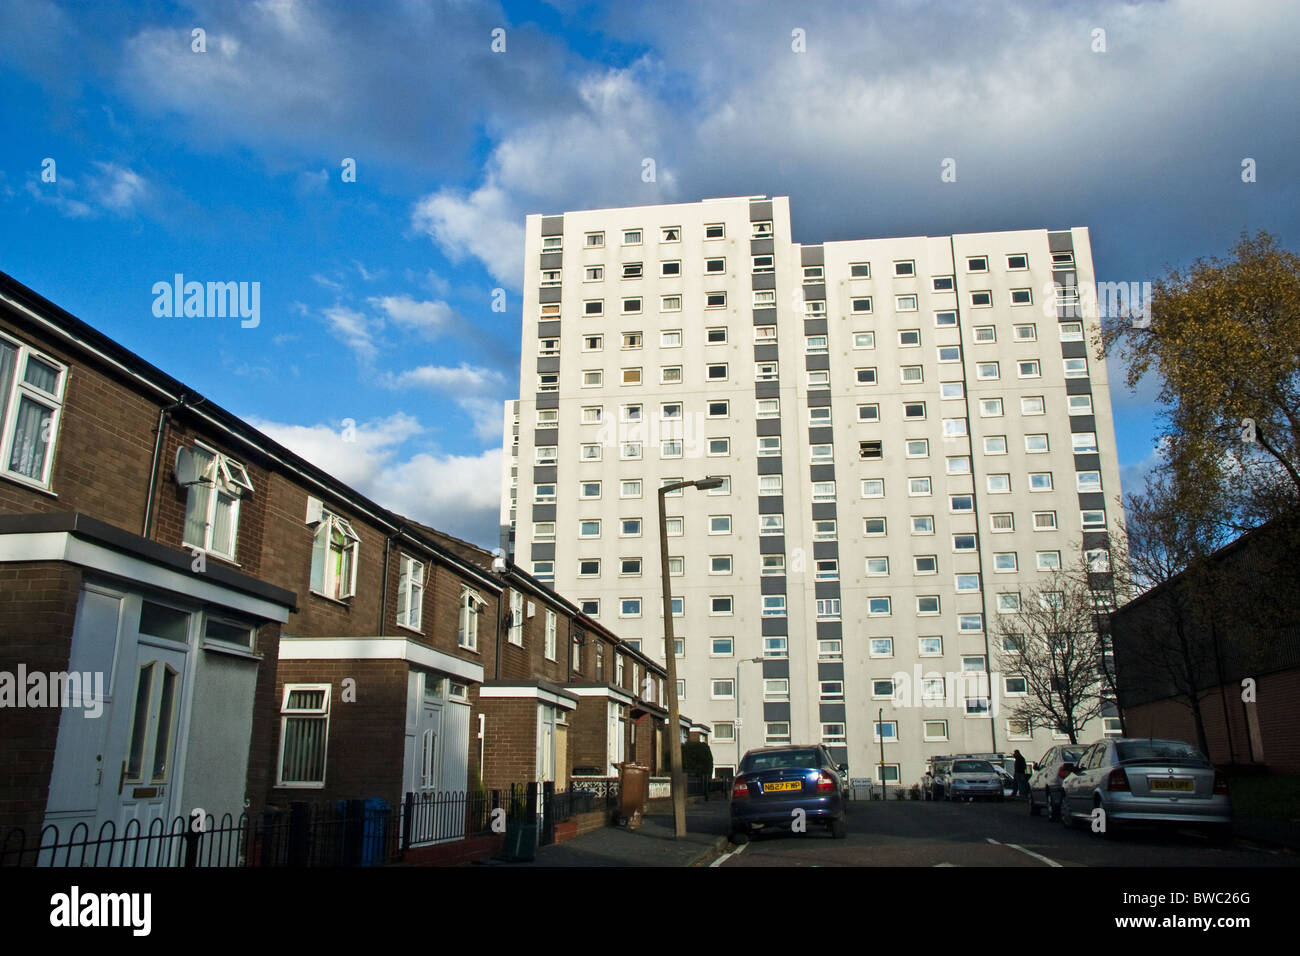 1970s High-rise council flats, Oldham, Greater Manchester, UK Stock Photo